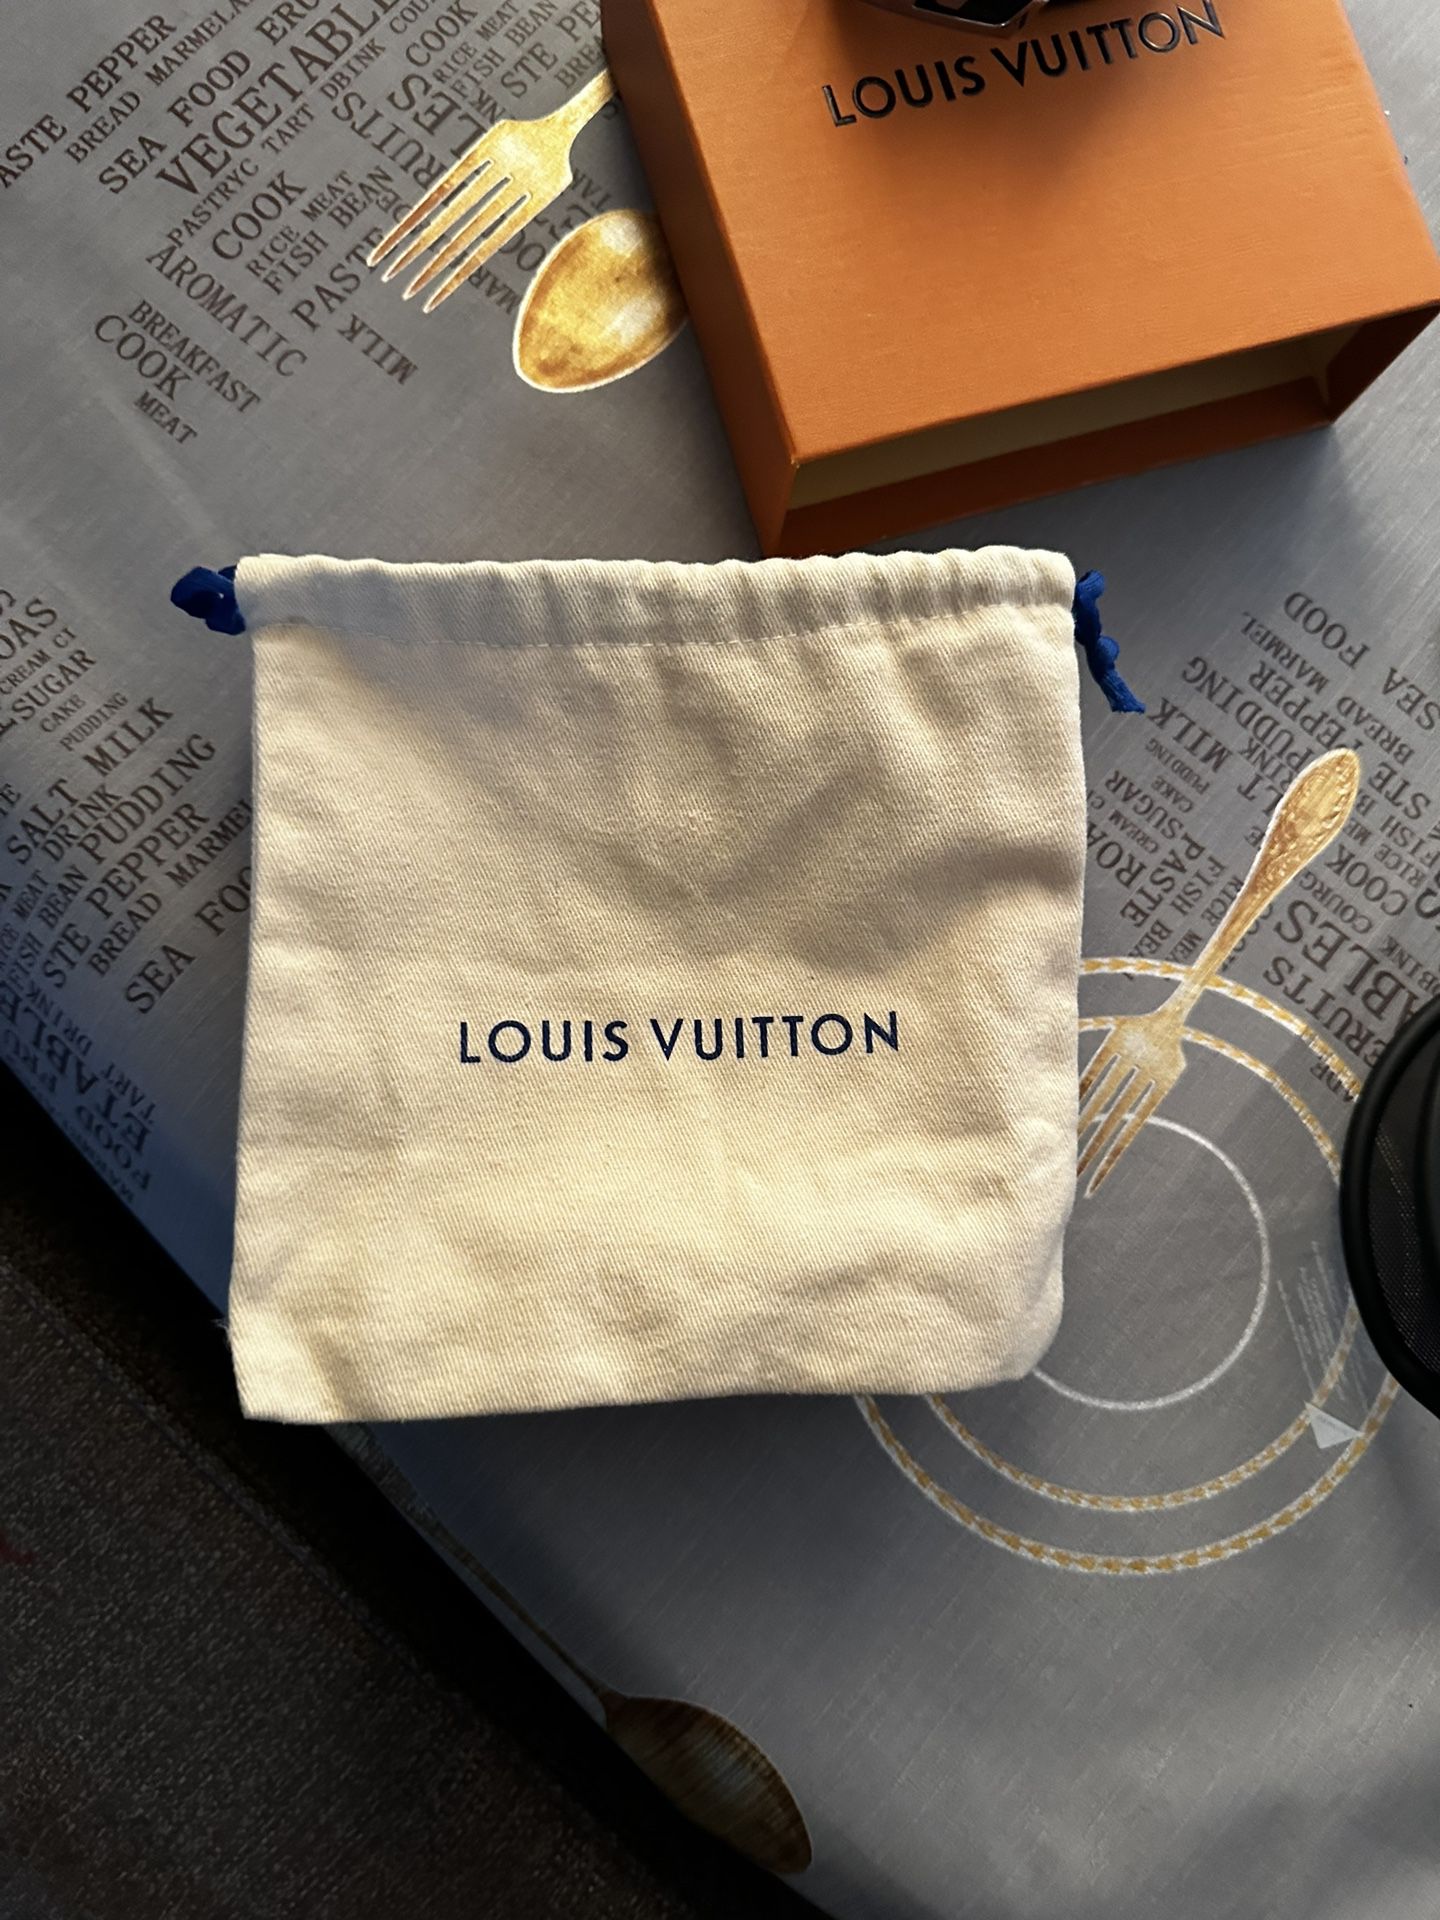 Louis Vuitton perfume original I have the receipt for Sale in Newark, NJ -  OfferUp